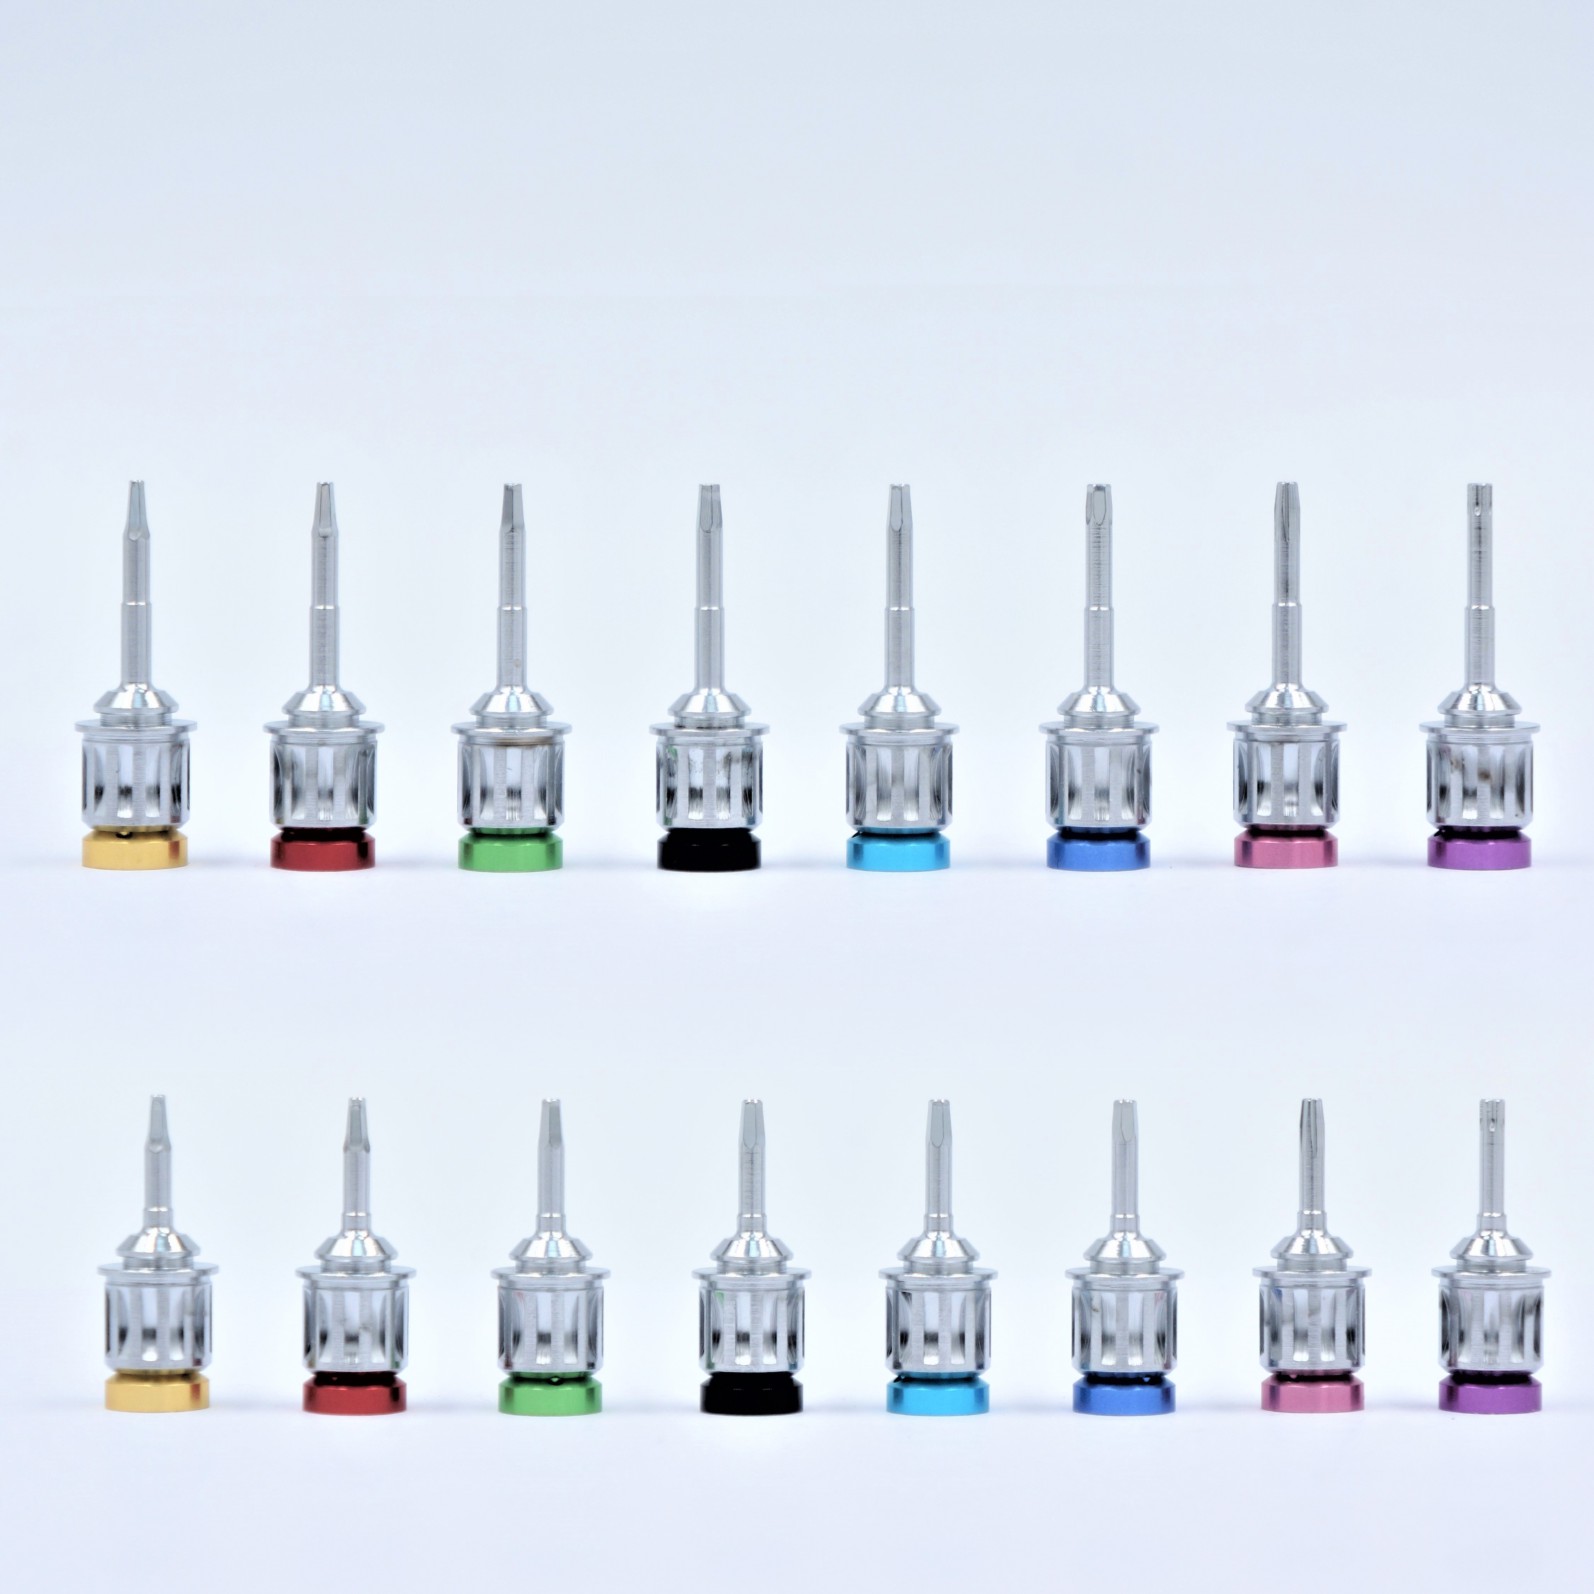  Dental Universal Implant Torque Screwdrivers Wrench Tool Kit For Dental Treatment.